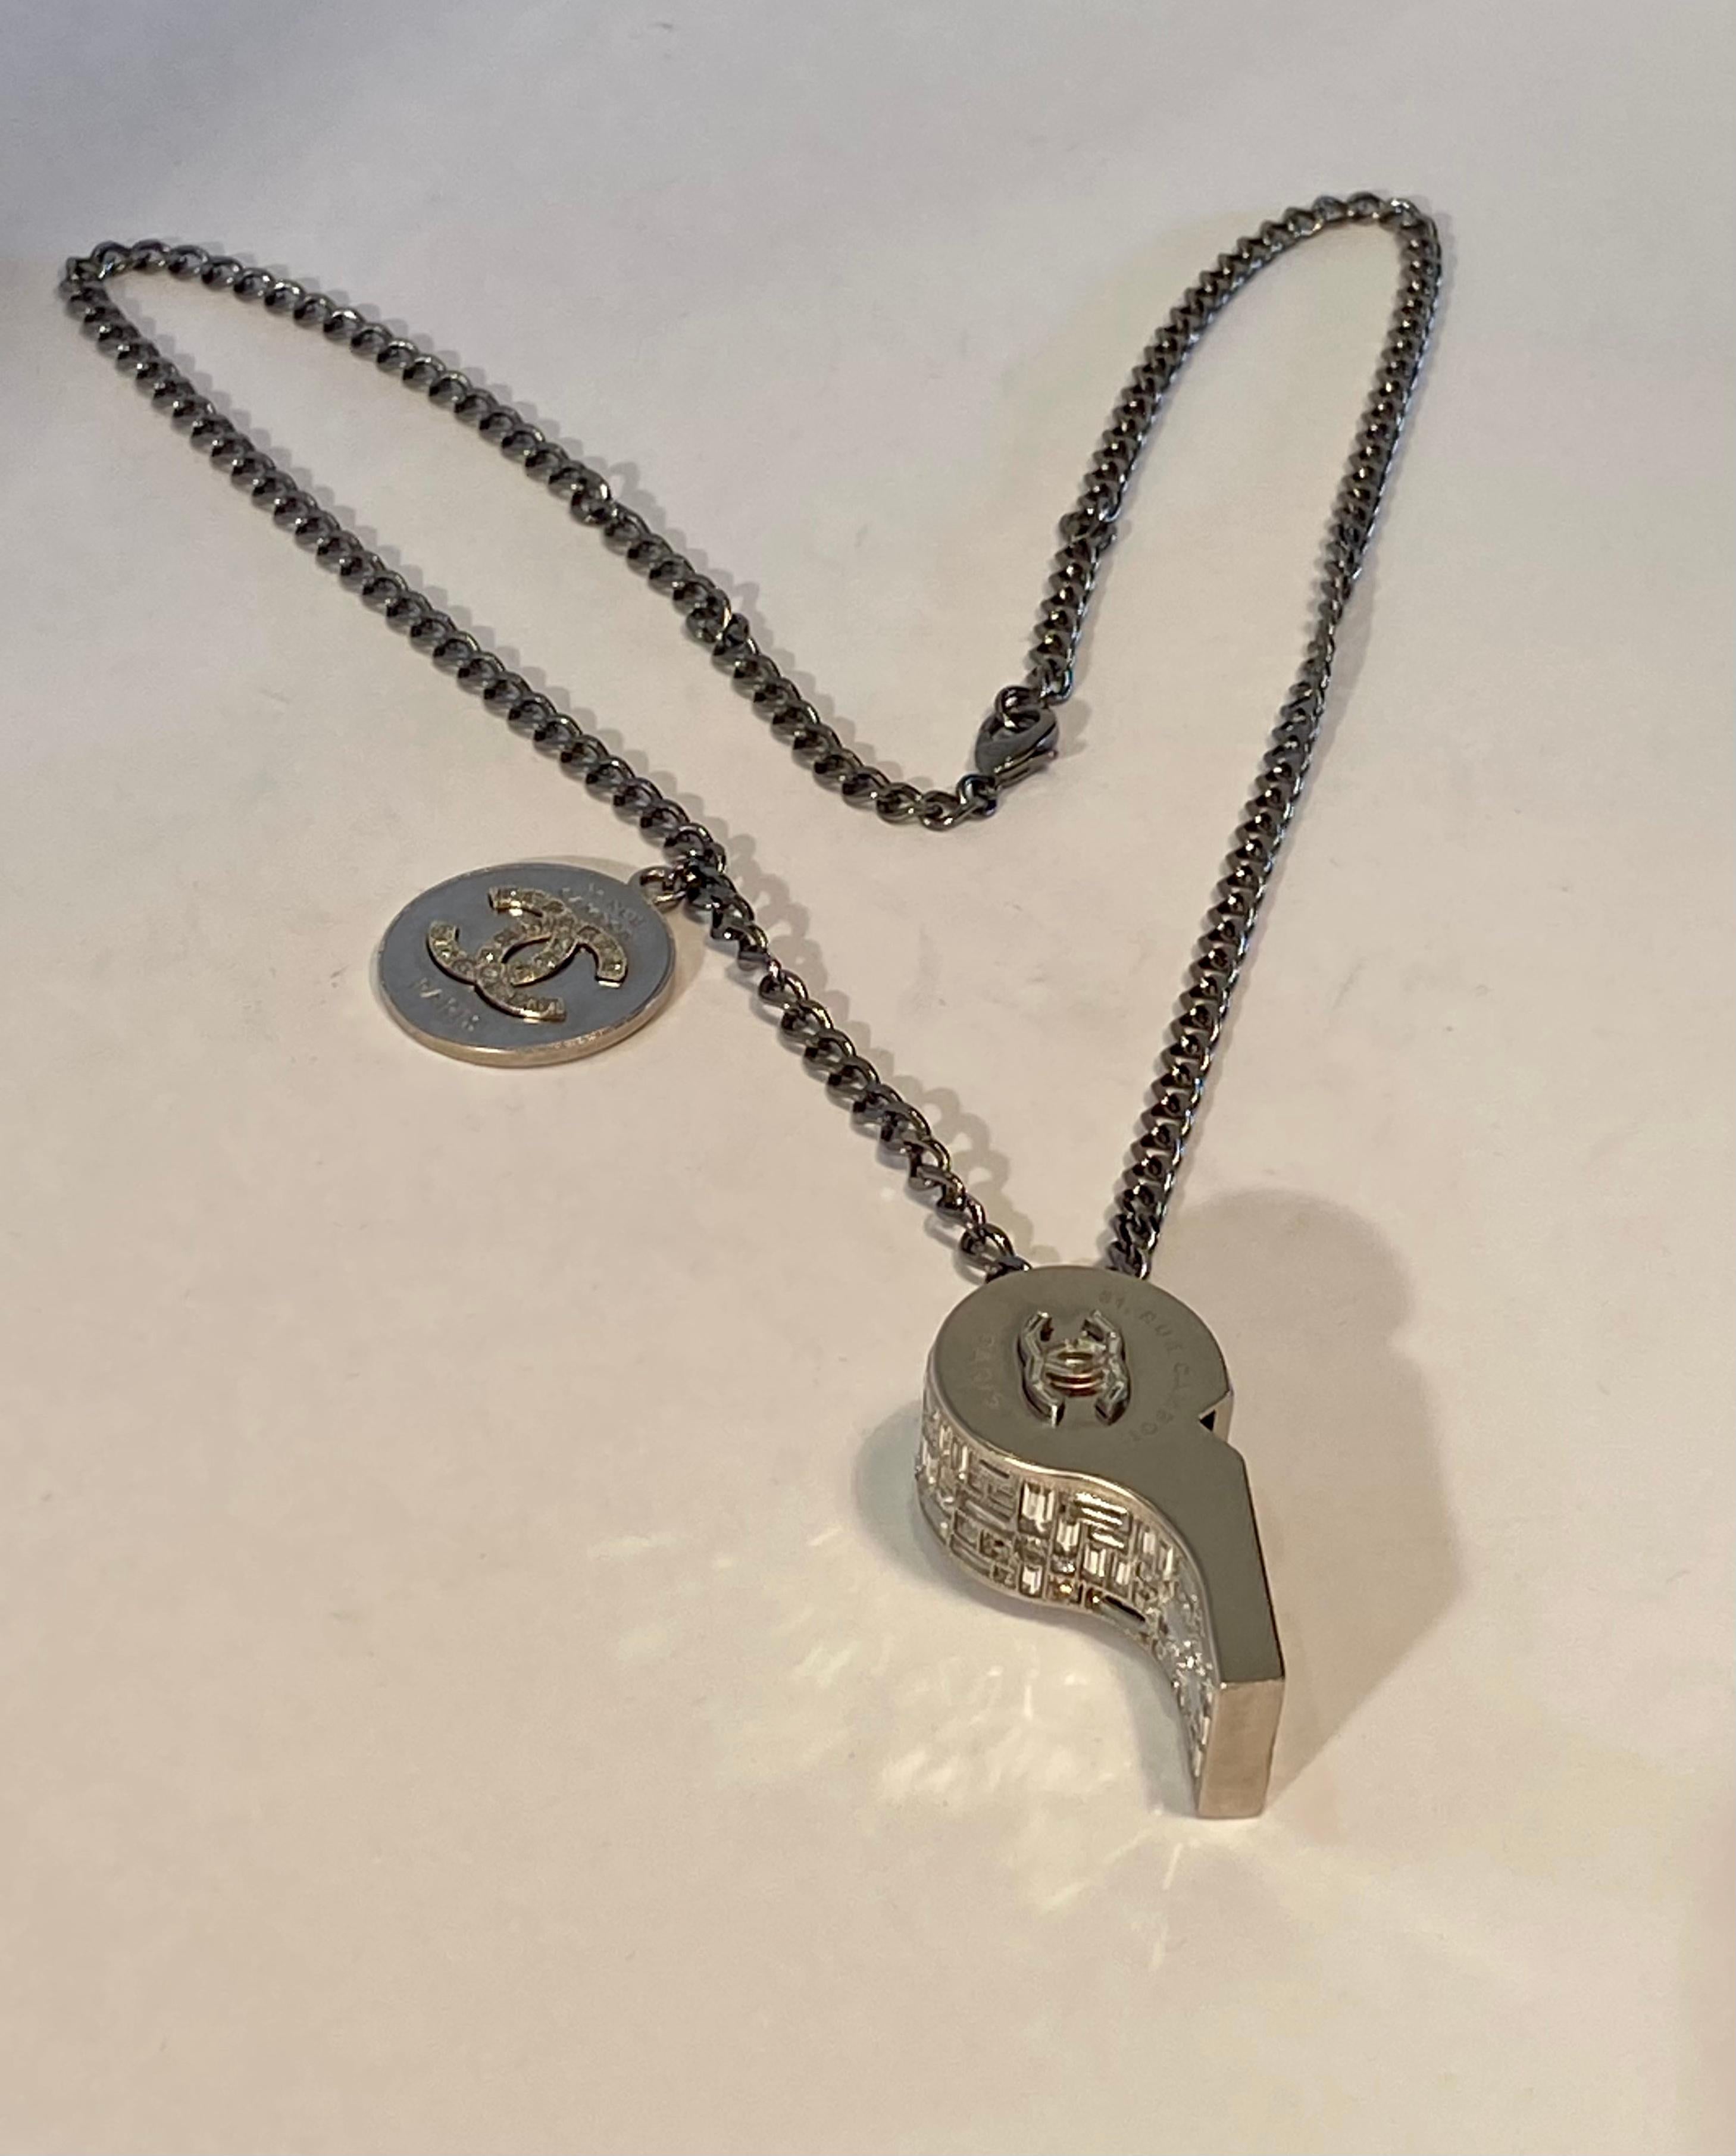 Modern Fancy Chanel Whistle Pendant with CC Medallion Necklace Chain Spring/Summer 2015